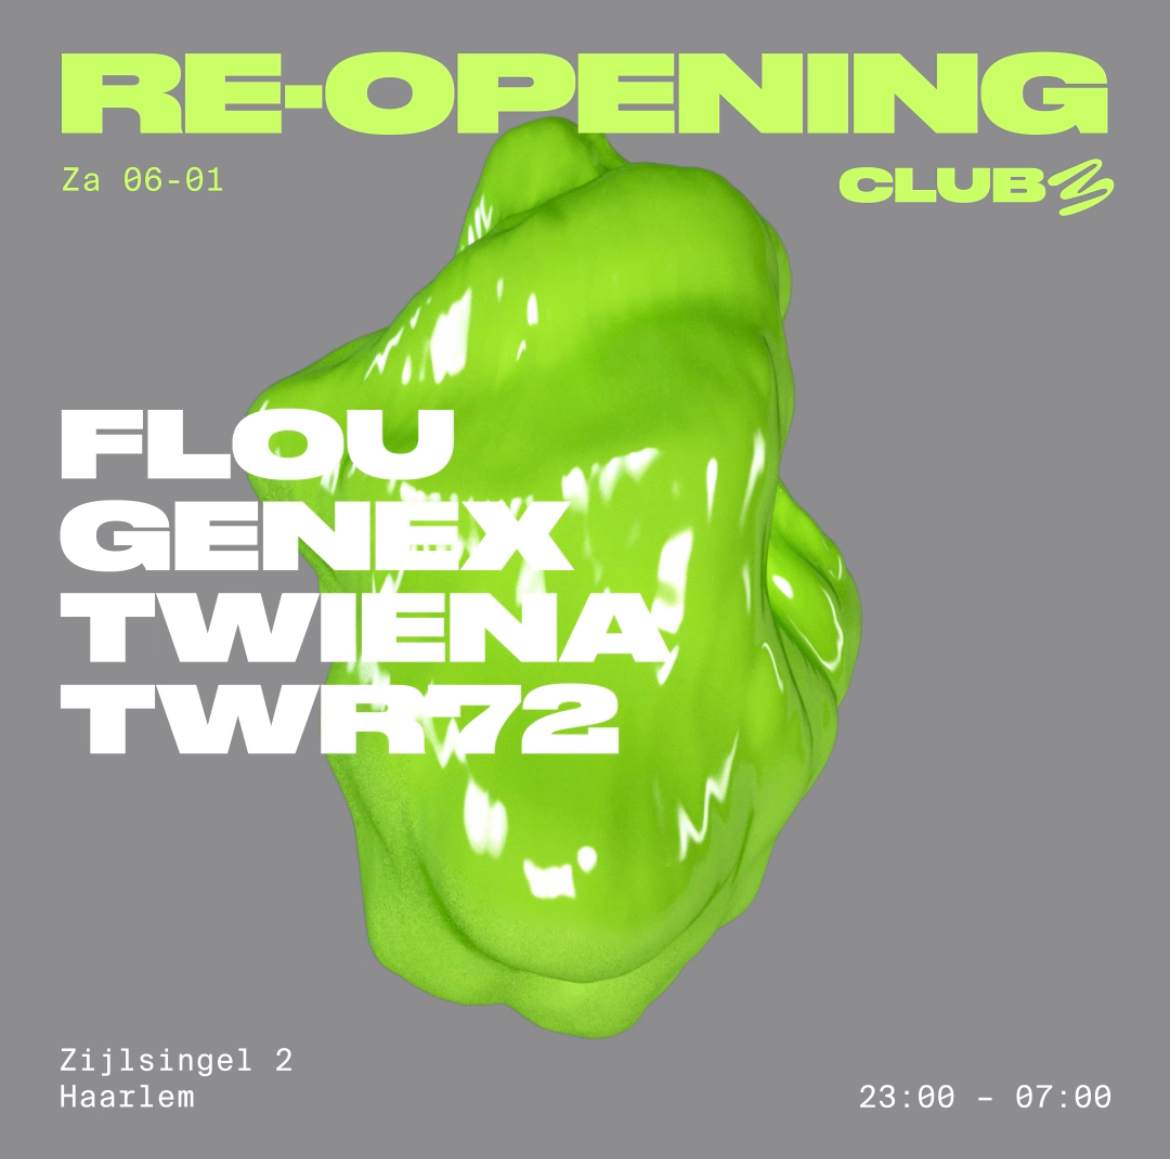 Club3 RE-OPENING - フライヤー表